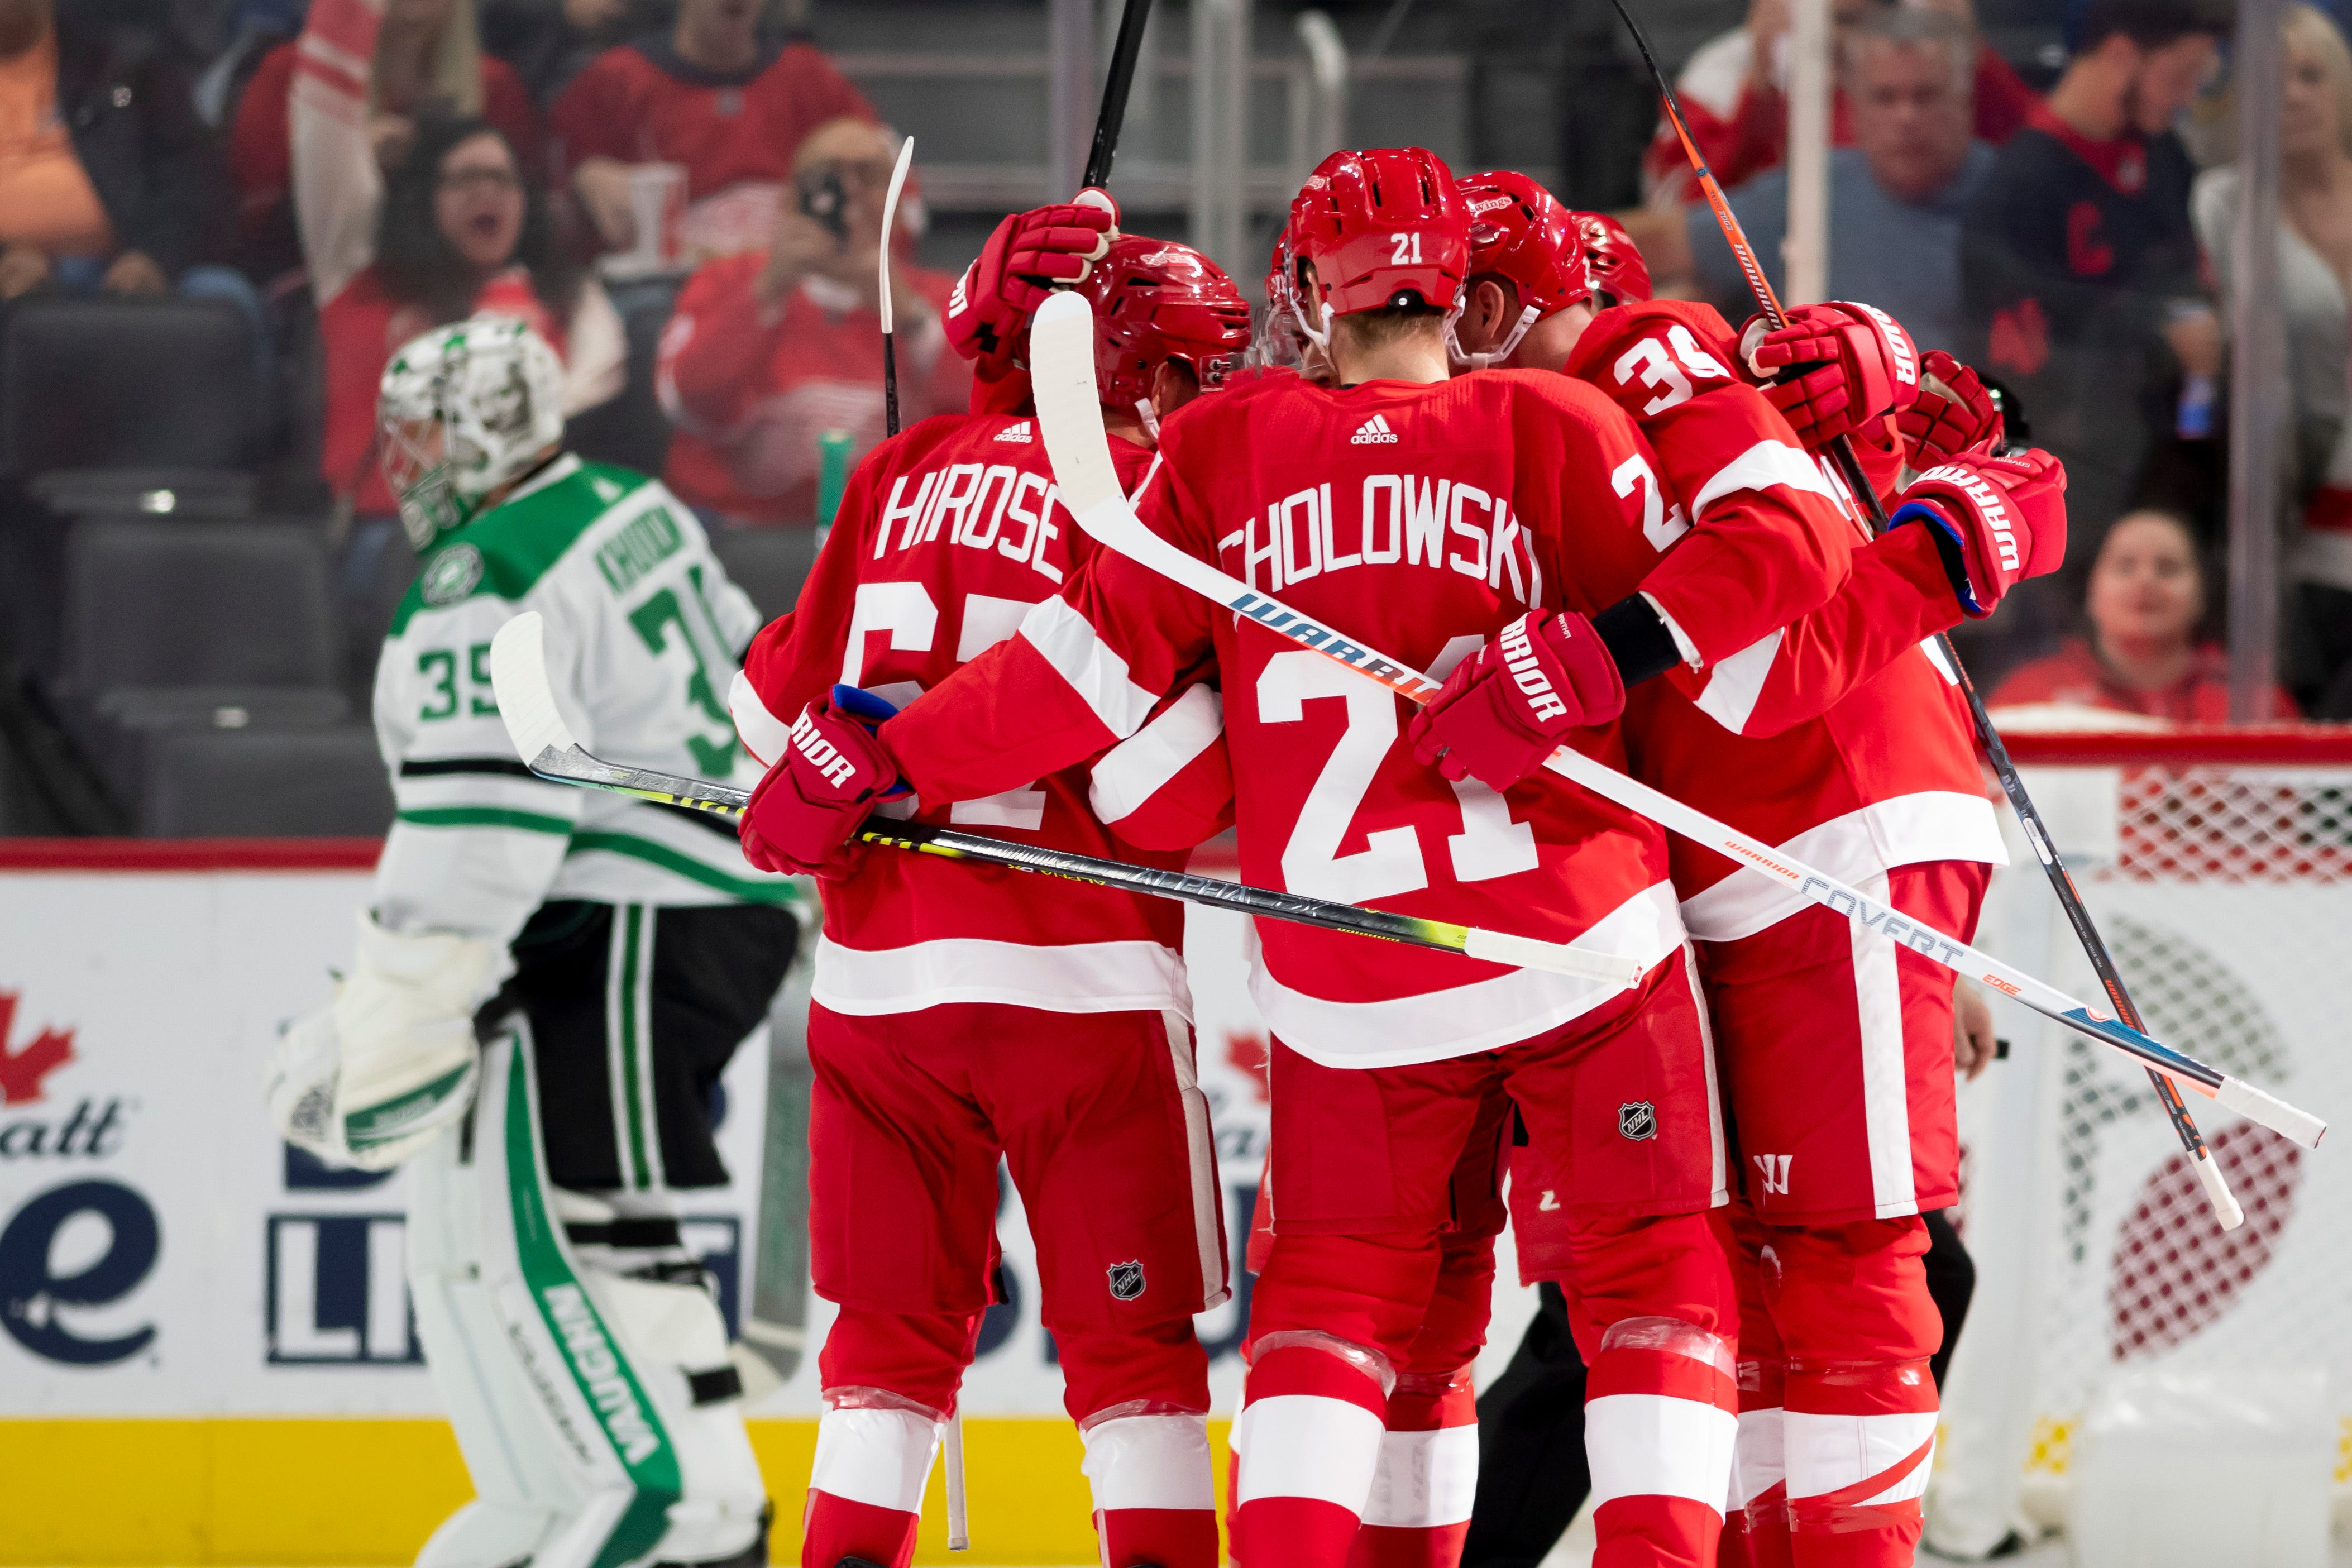 The Red Wings celebrate a goal by right wing Anthony Mantha in the second period.